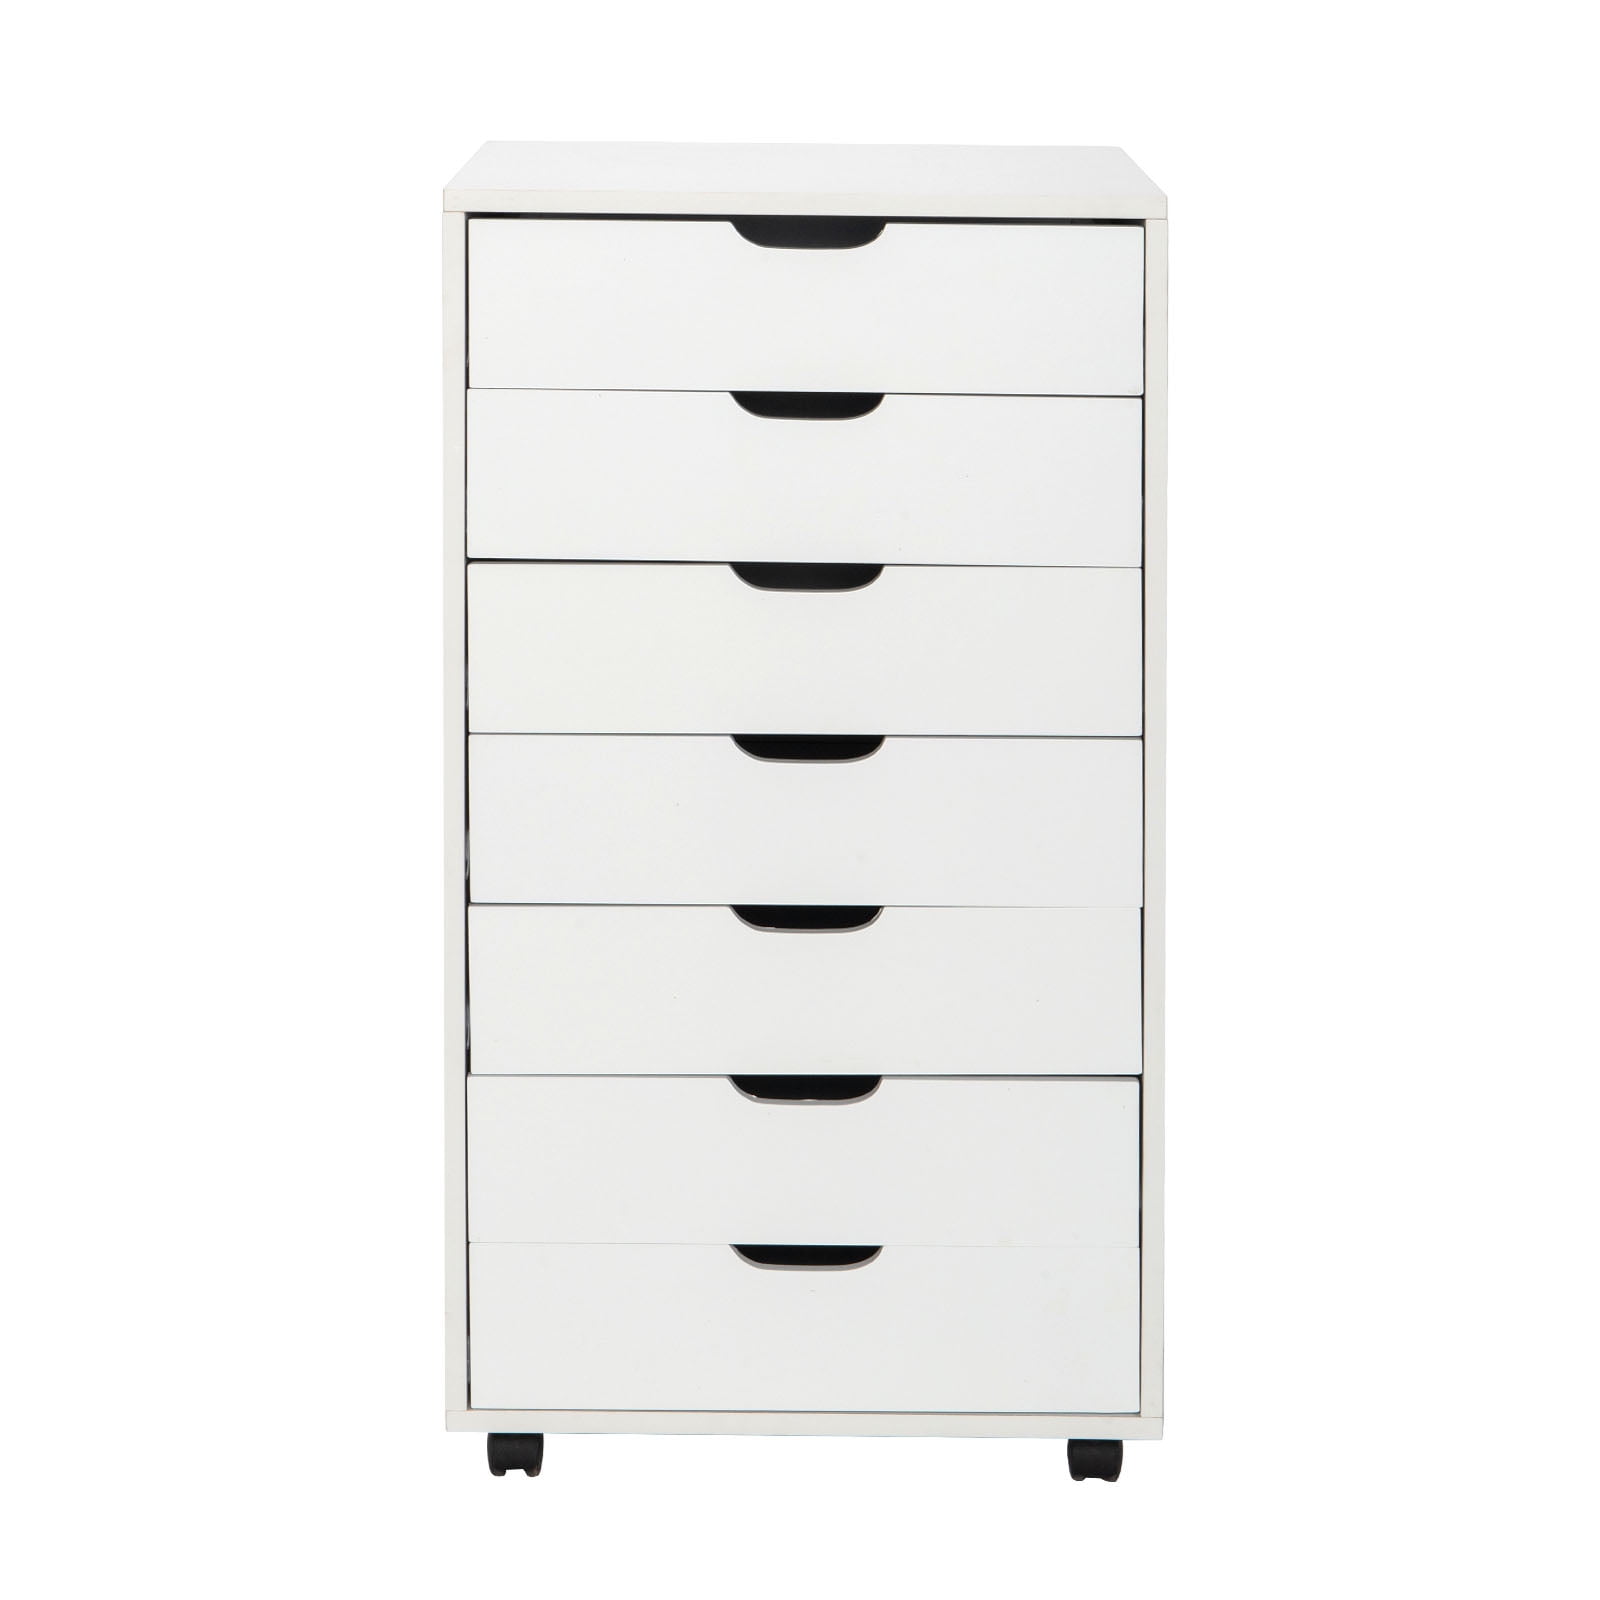 Details about   7-Drawer Wood Filing Cabinet Mobile Storage Cabinet Closet Office White Color 